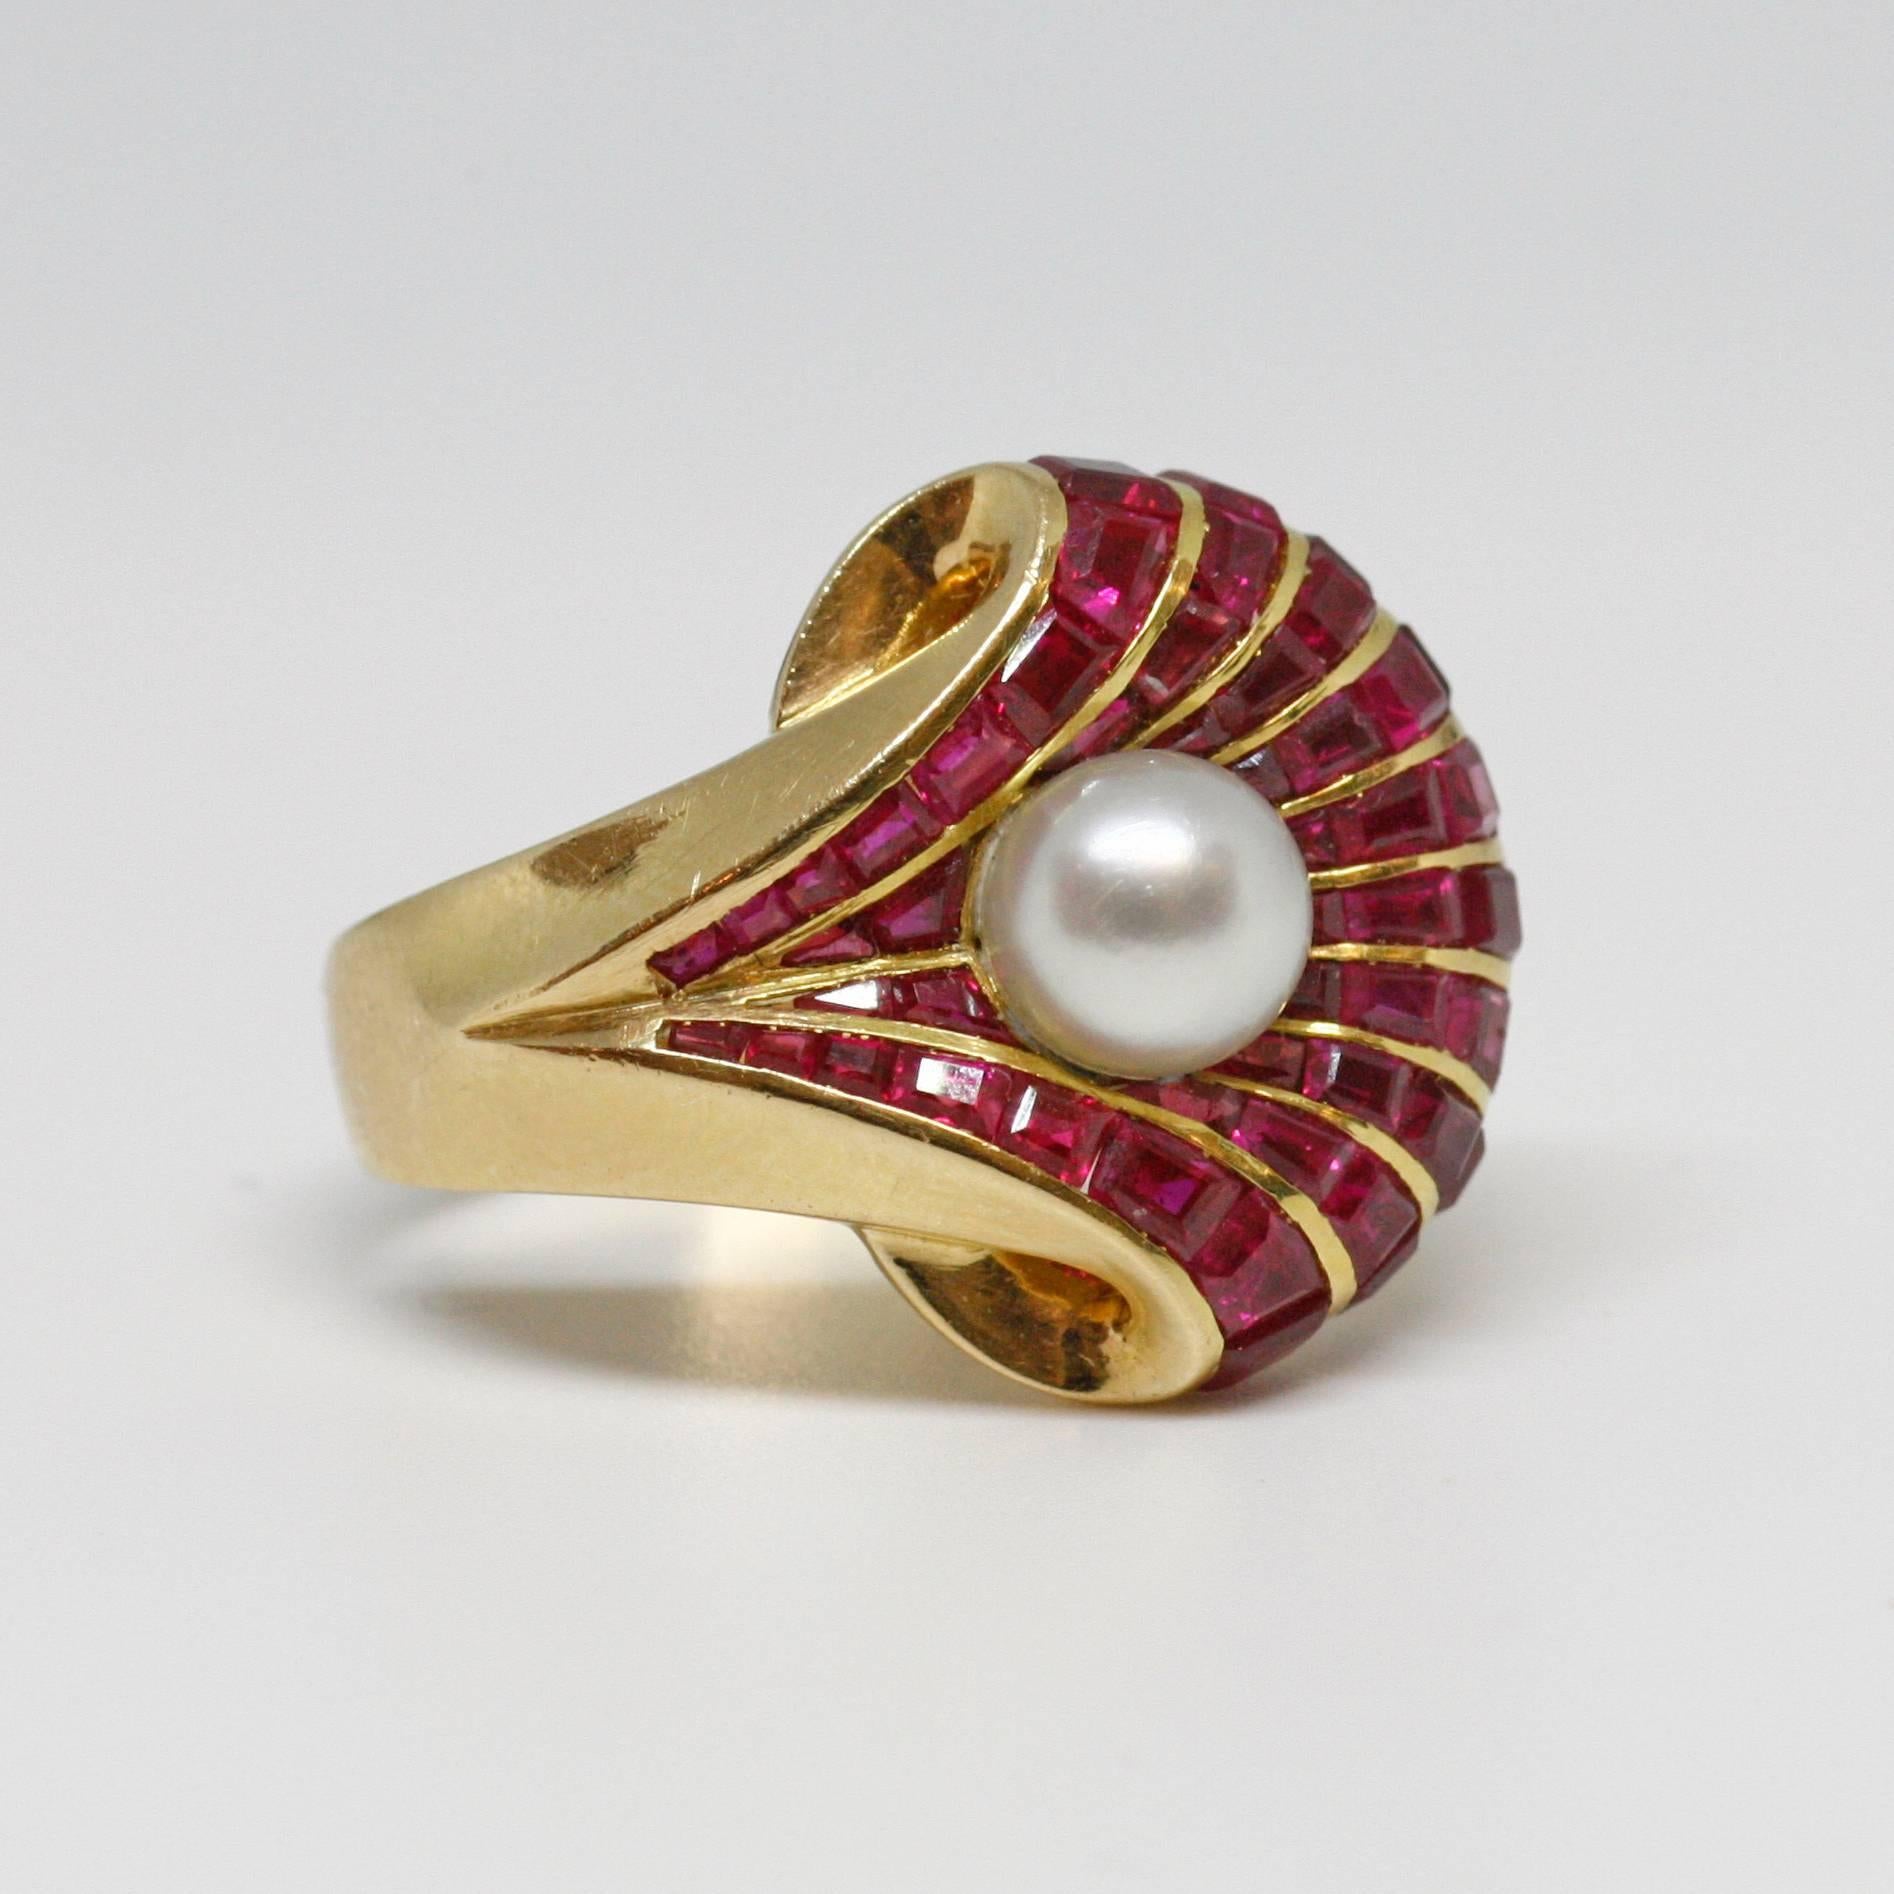 Rare cocktail ring with a very interesting design. This ring is made in 18k gold (slightly pinkish color) and set with calibré-cut rubies (raspberry color, probably of Burmese origine) and a central cultural pearl (diameter 6.9 mms).
Tiny chip on